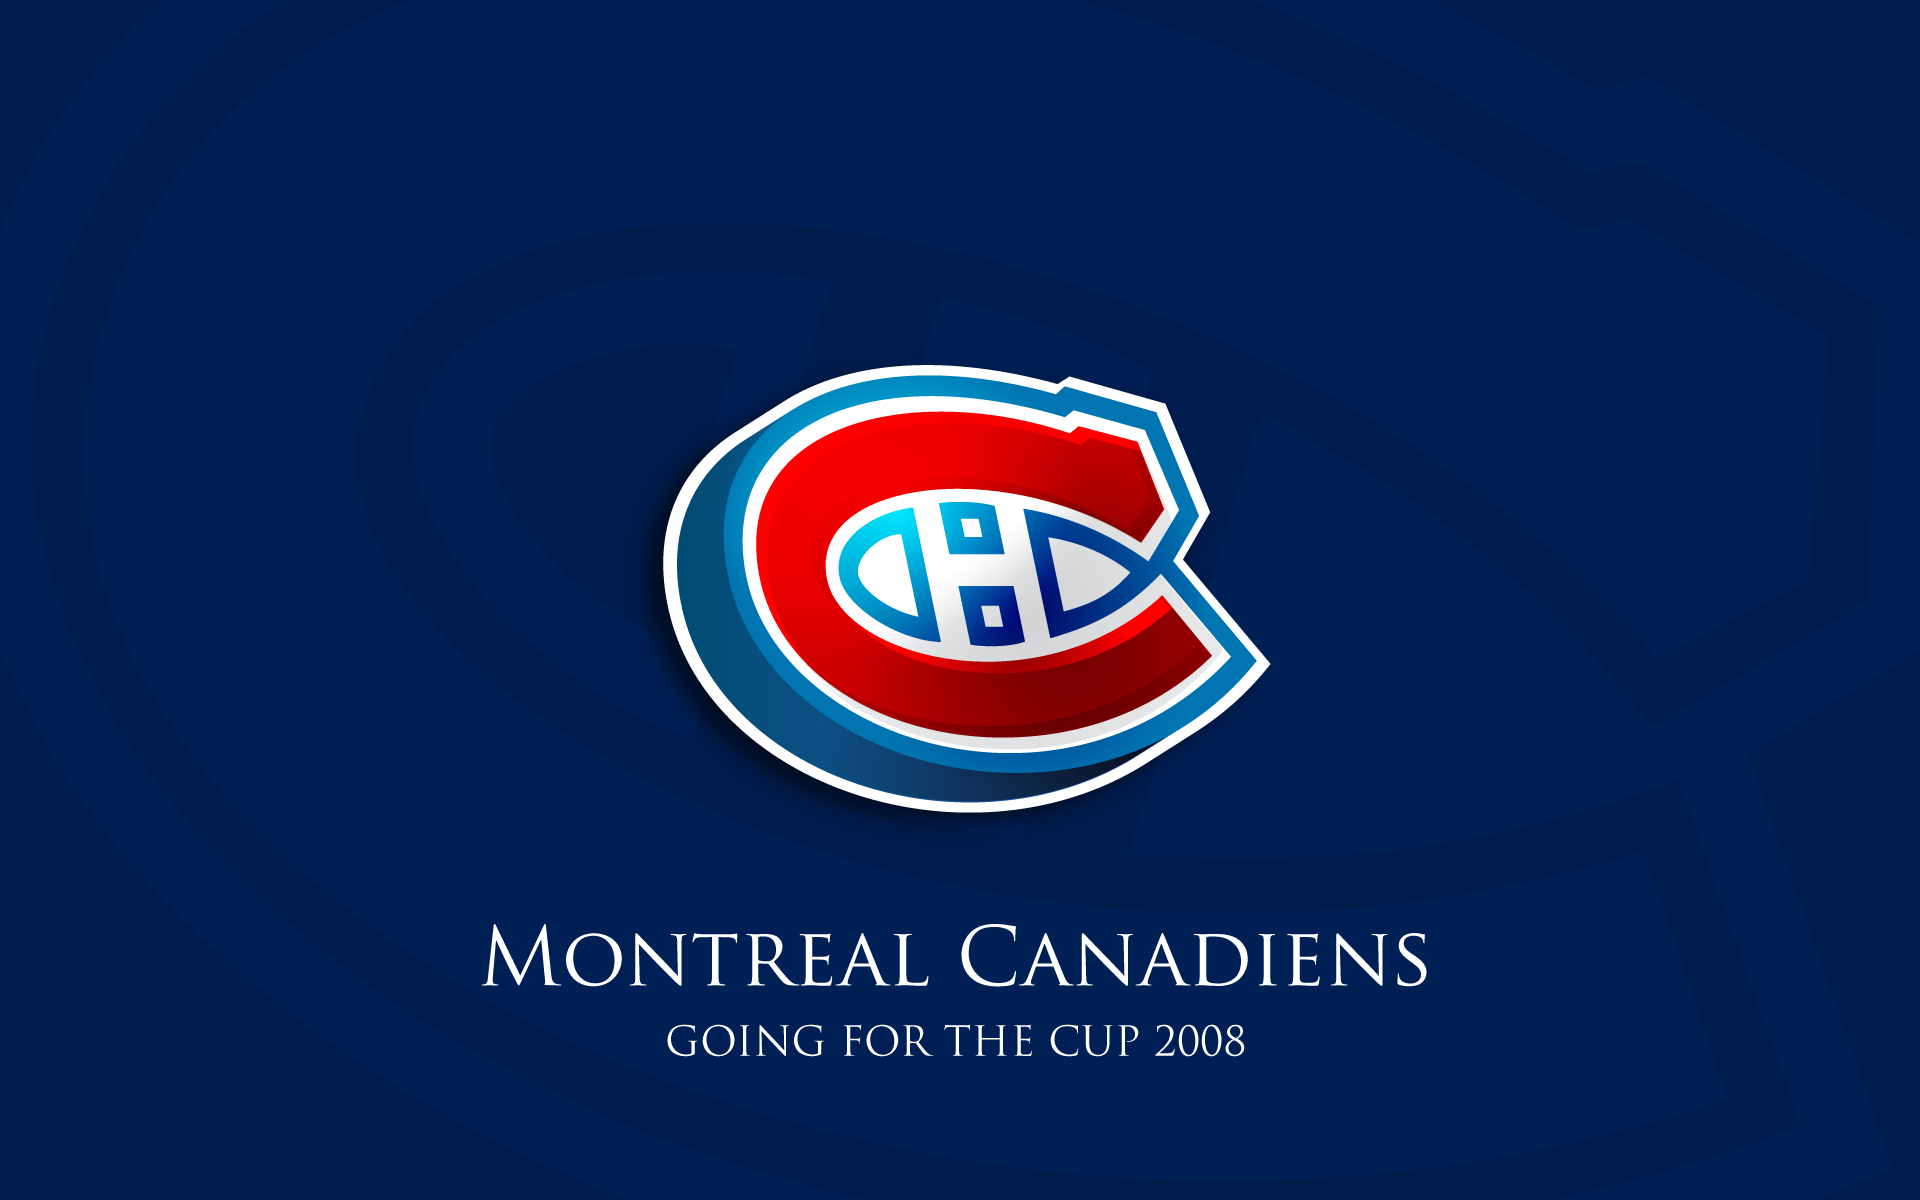 Montreal Canadiens images Mon